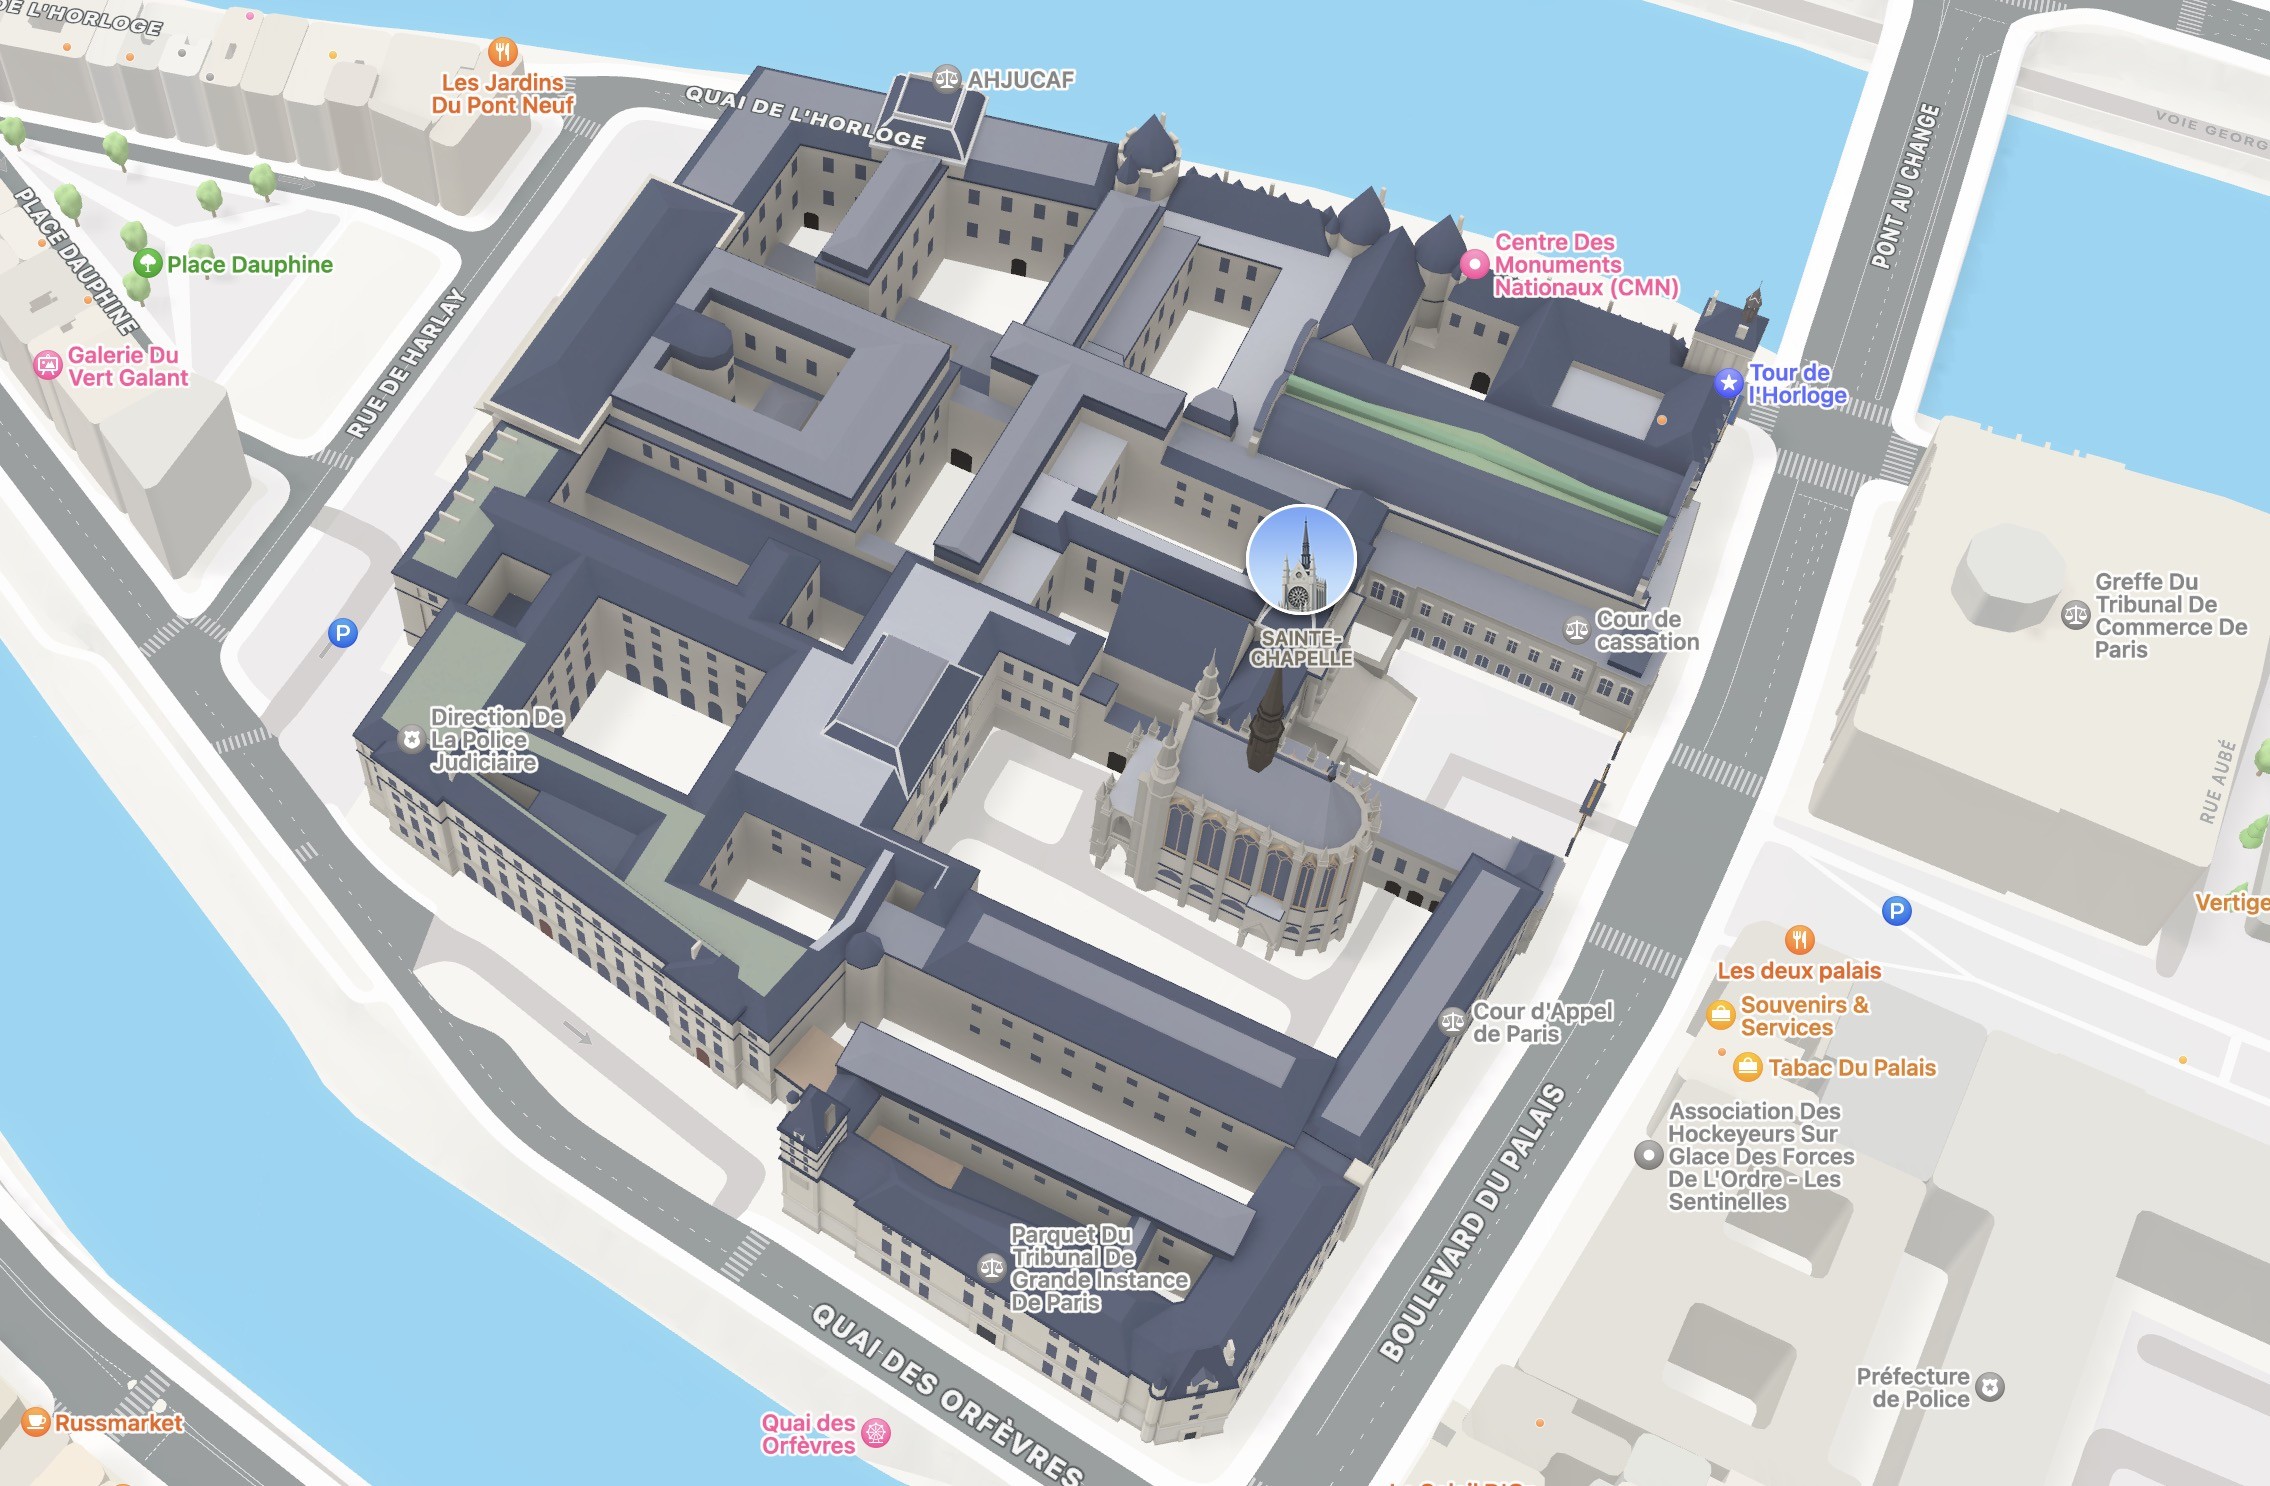 Apple Maps Expands Detailed 3D Map and Cycling Directions to Paris -  MacRumors